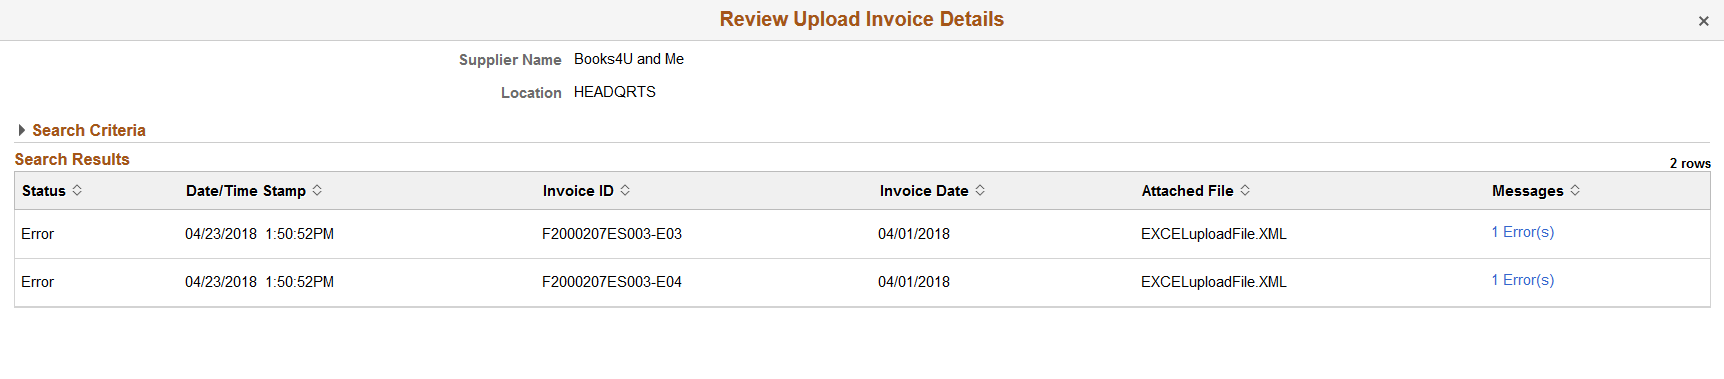 Review Upload Invoice Details page